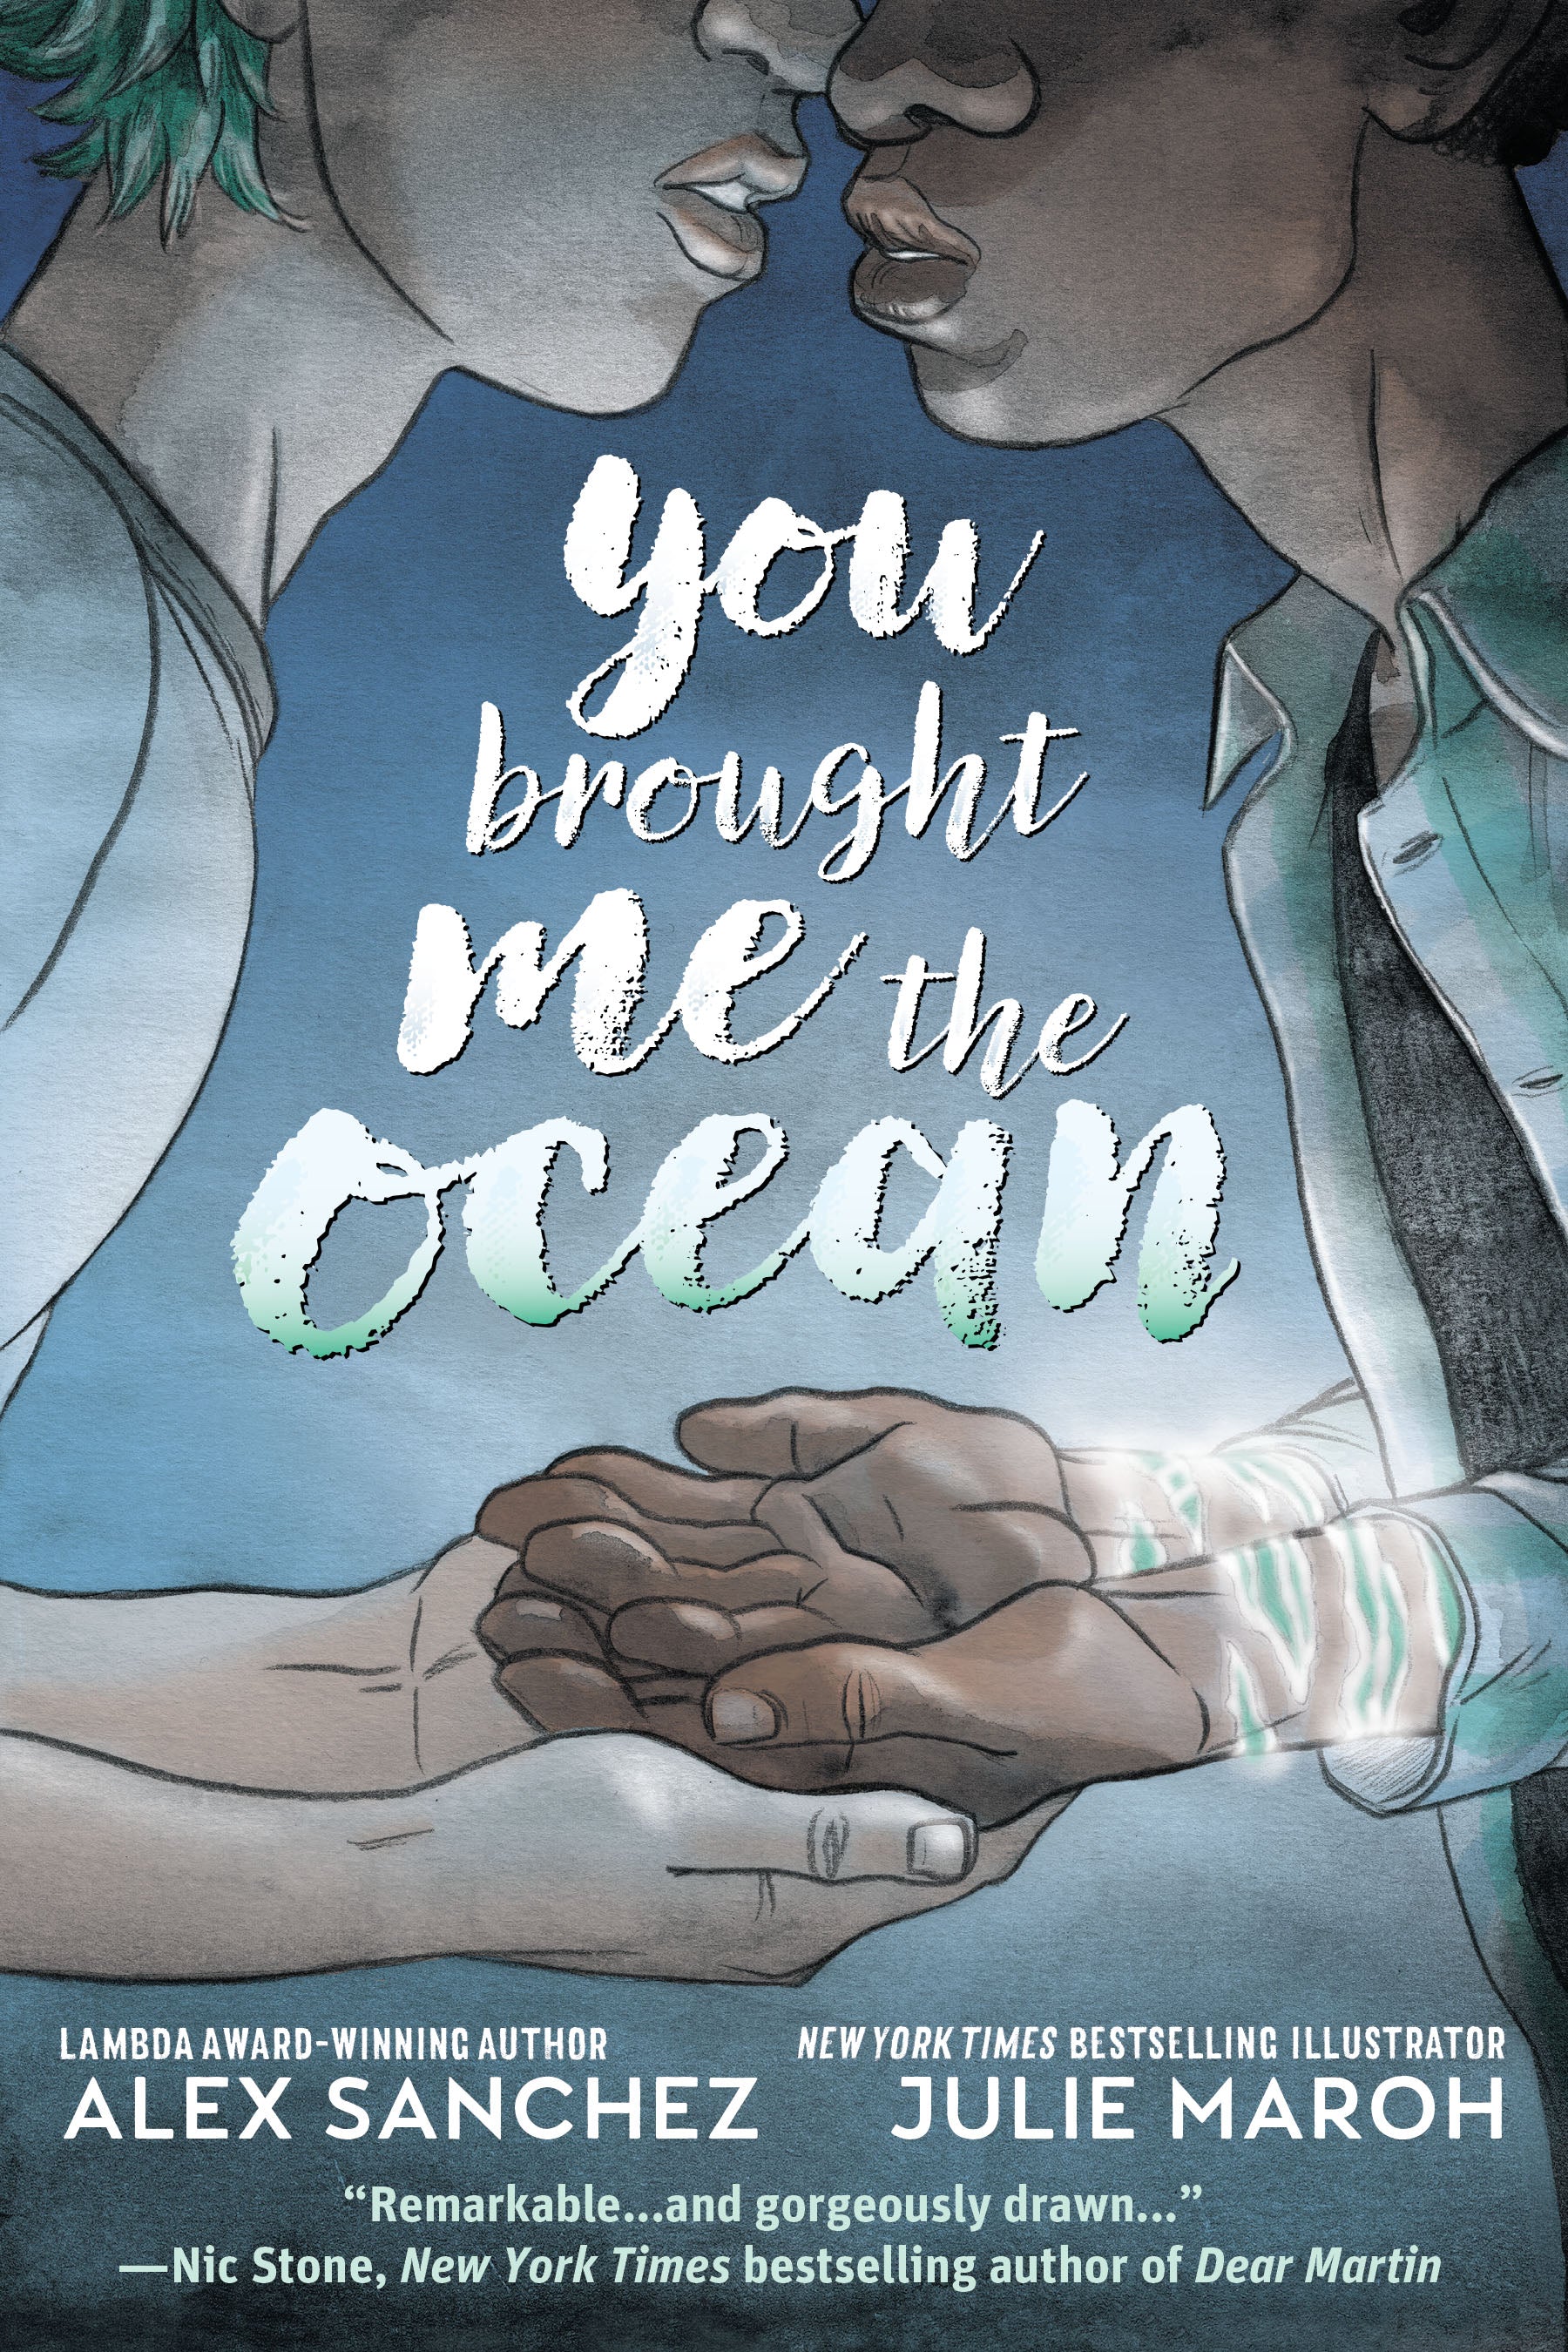 YOU BROUGHT ME THE OCEAN TRADE PAPERBACK